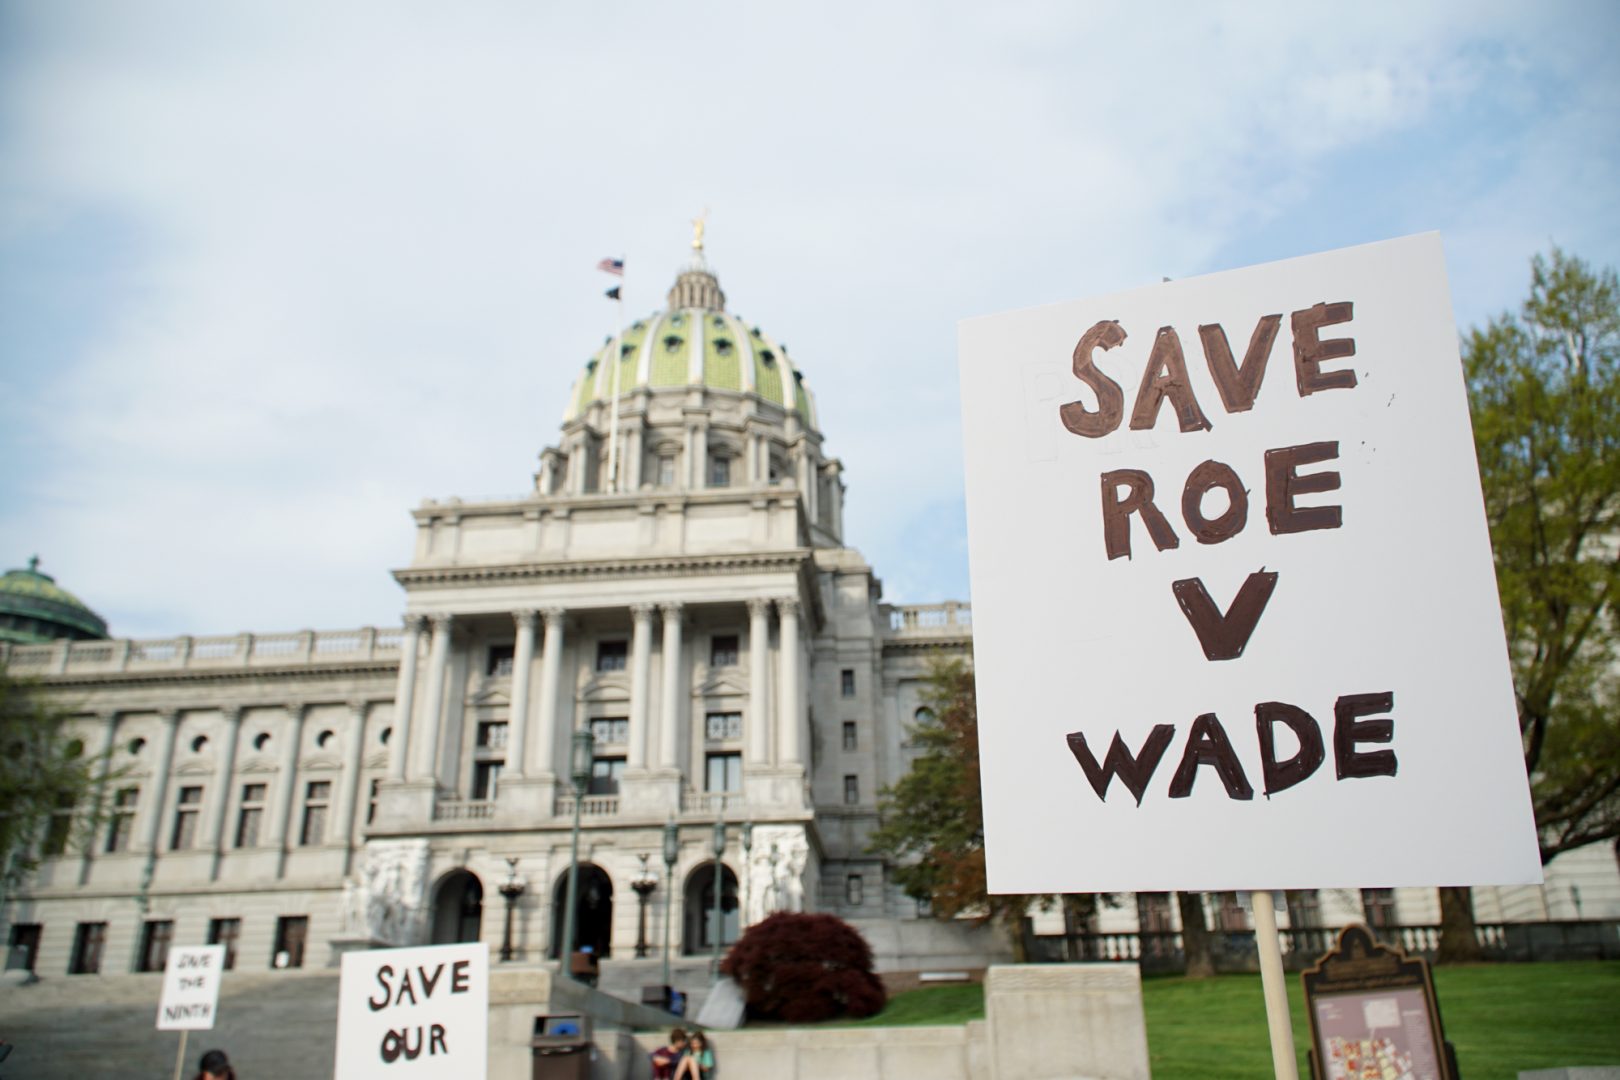 More than 30 people gathered outside of the state Capitol on May 3, 2022 to protest the leaked draft U.S. Supreme Court opinion that would reverse Roe v. Wade.